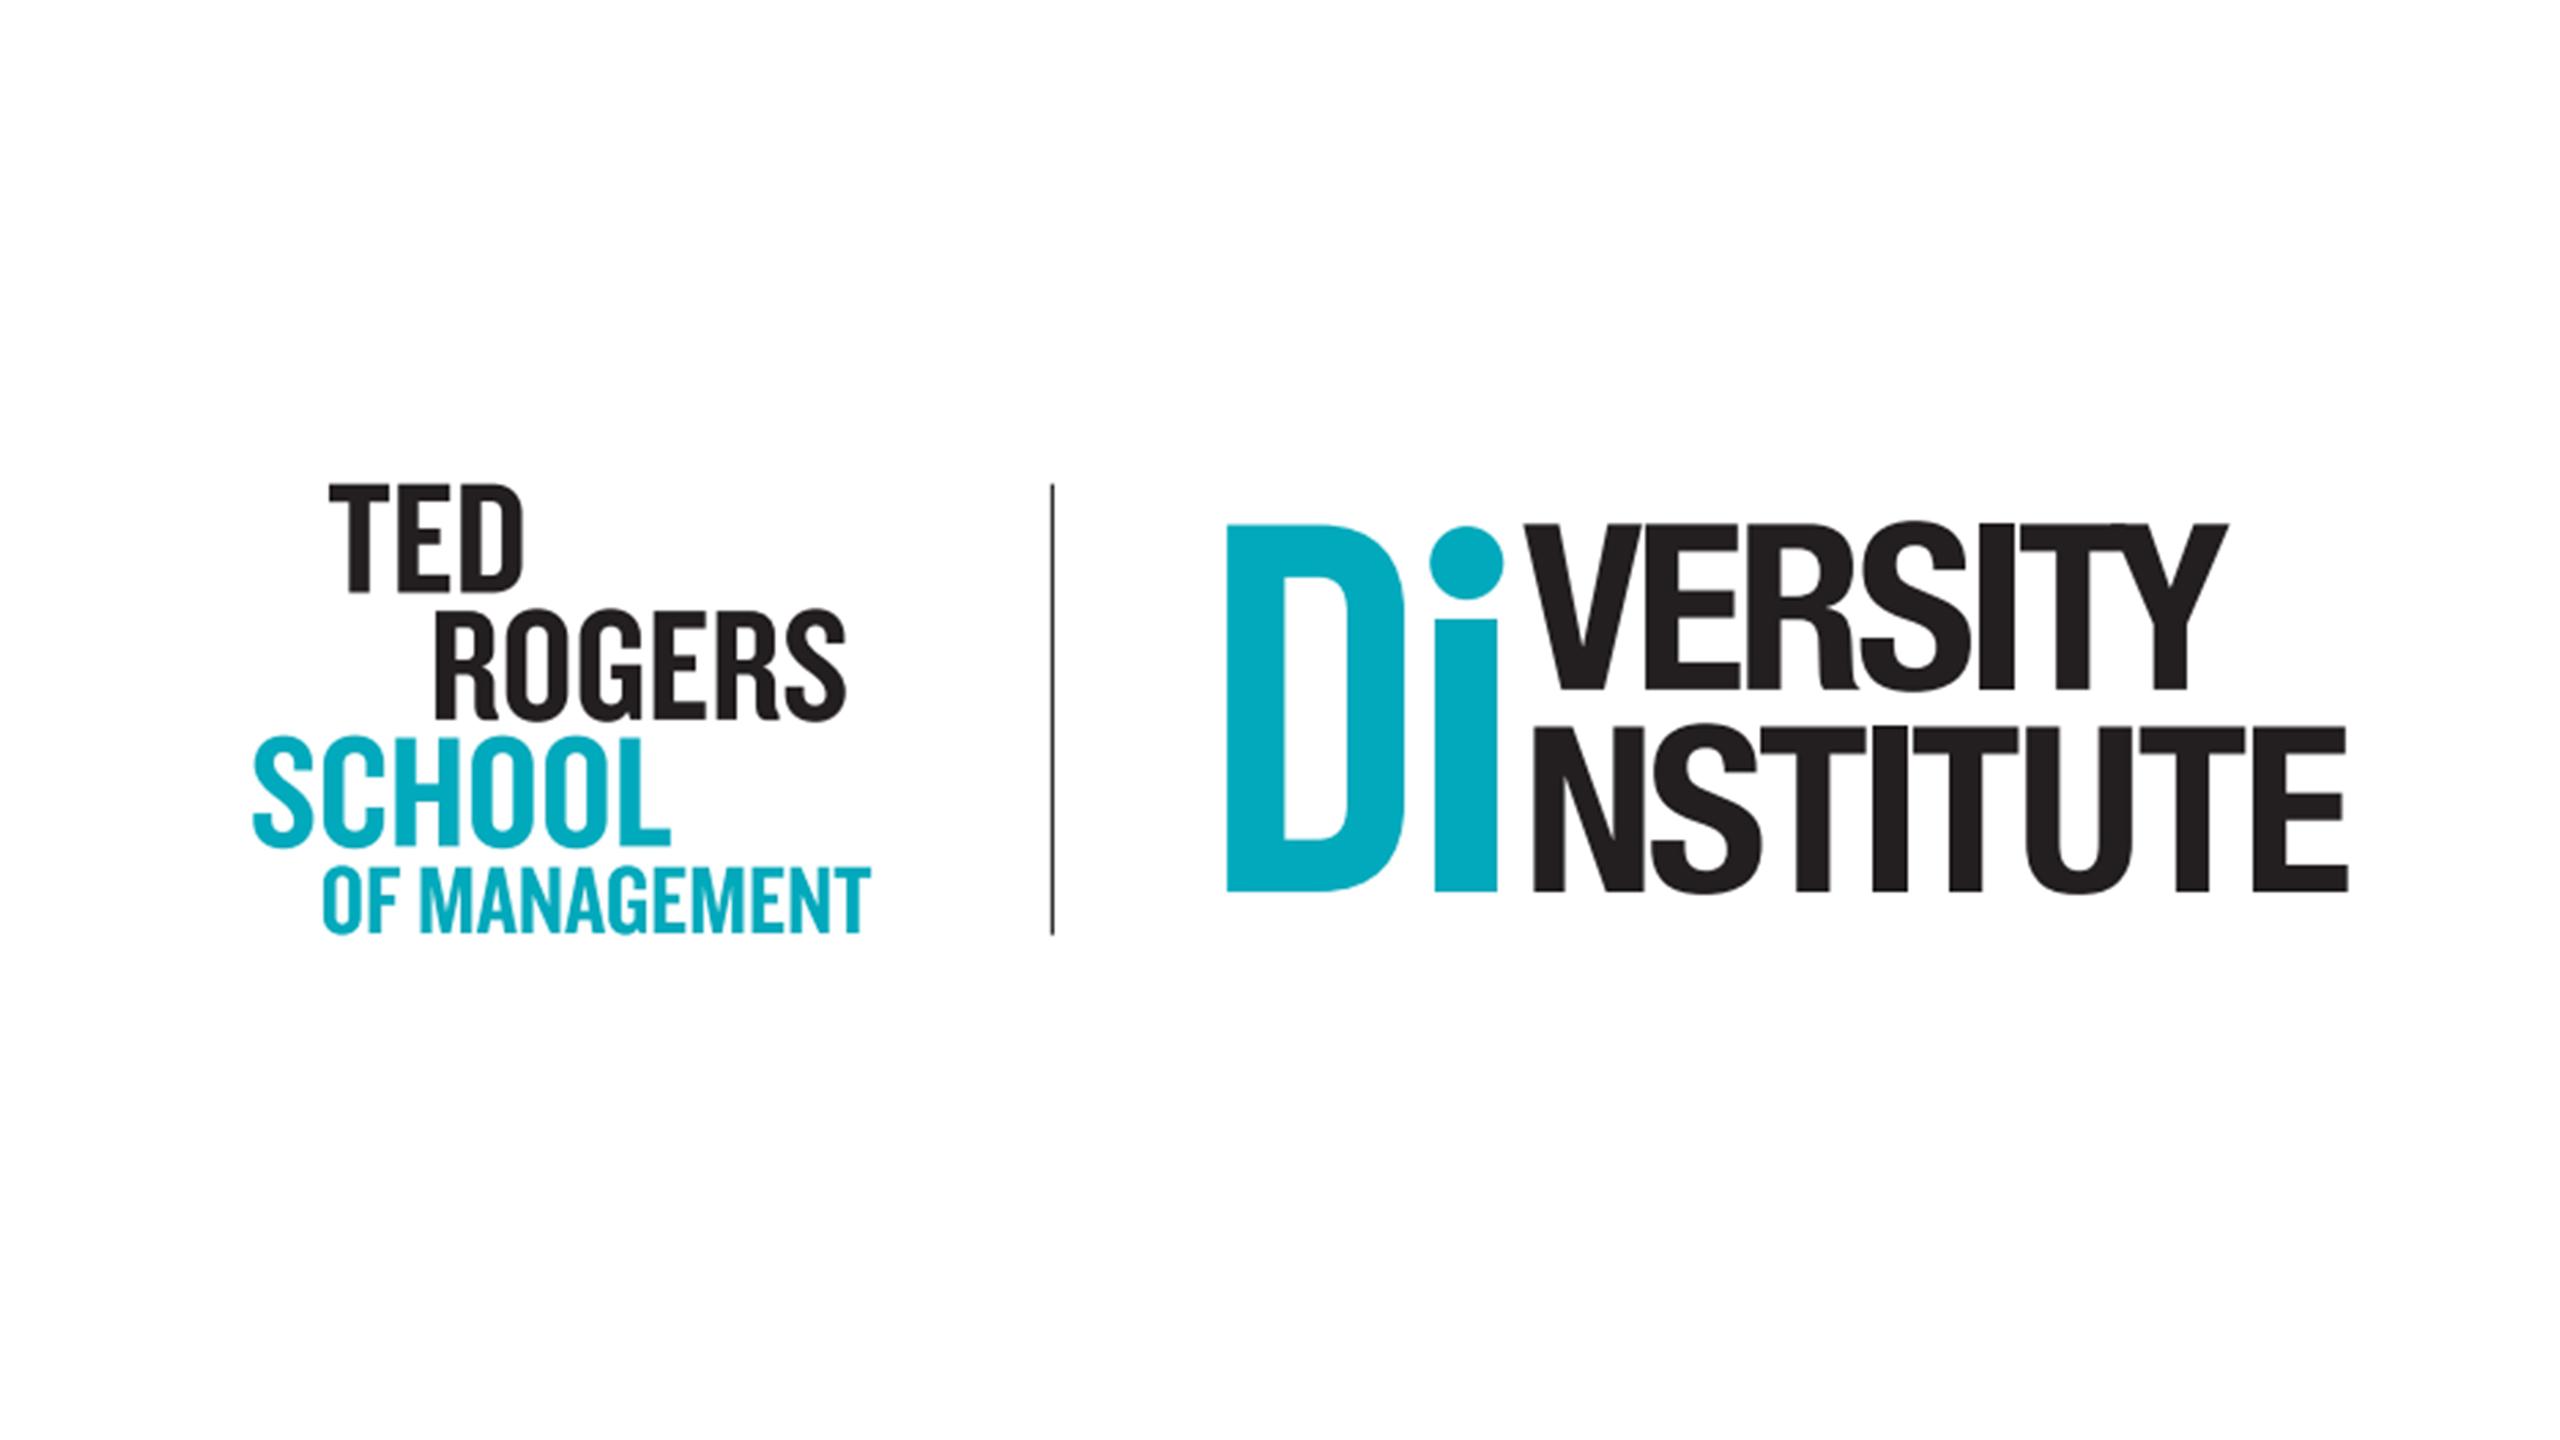 The Ted Rogers School of Management logo and the Diversity Institute logo